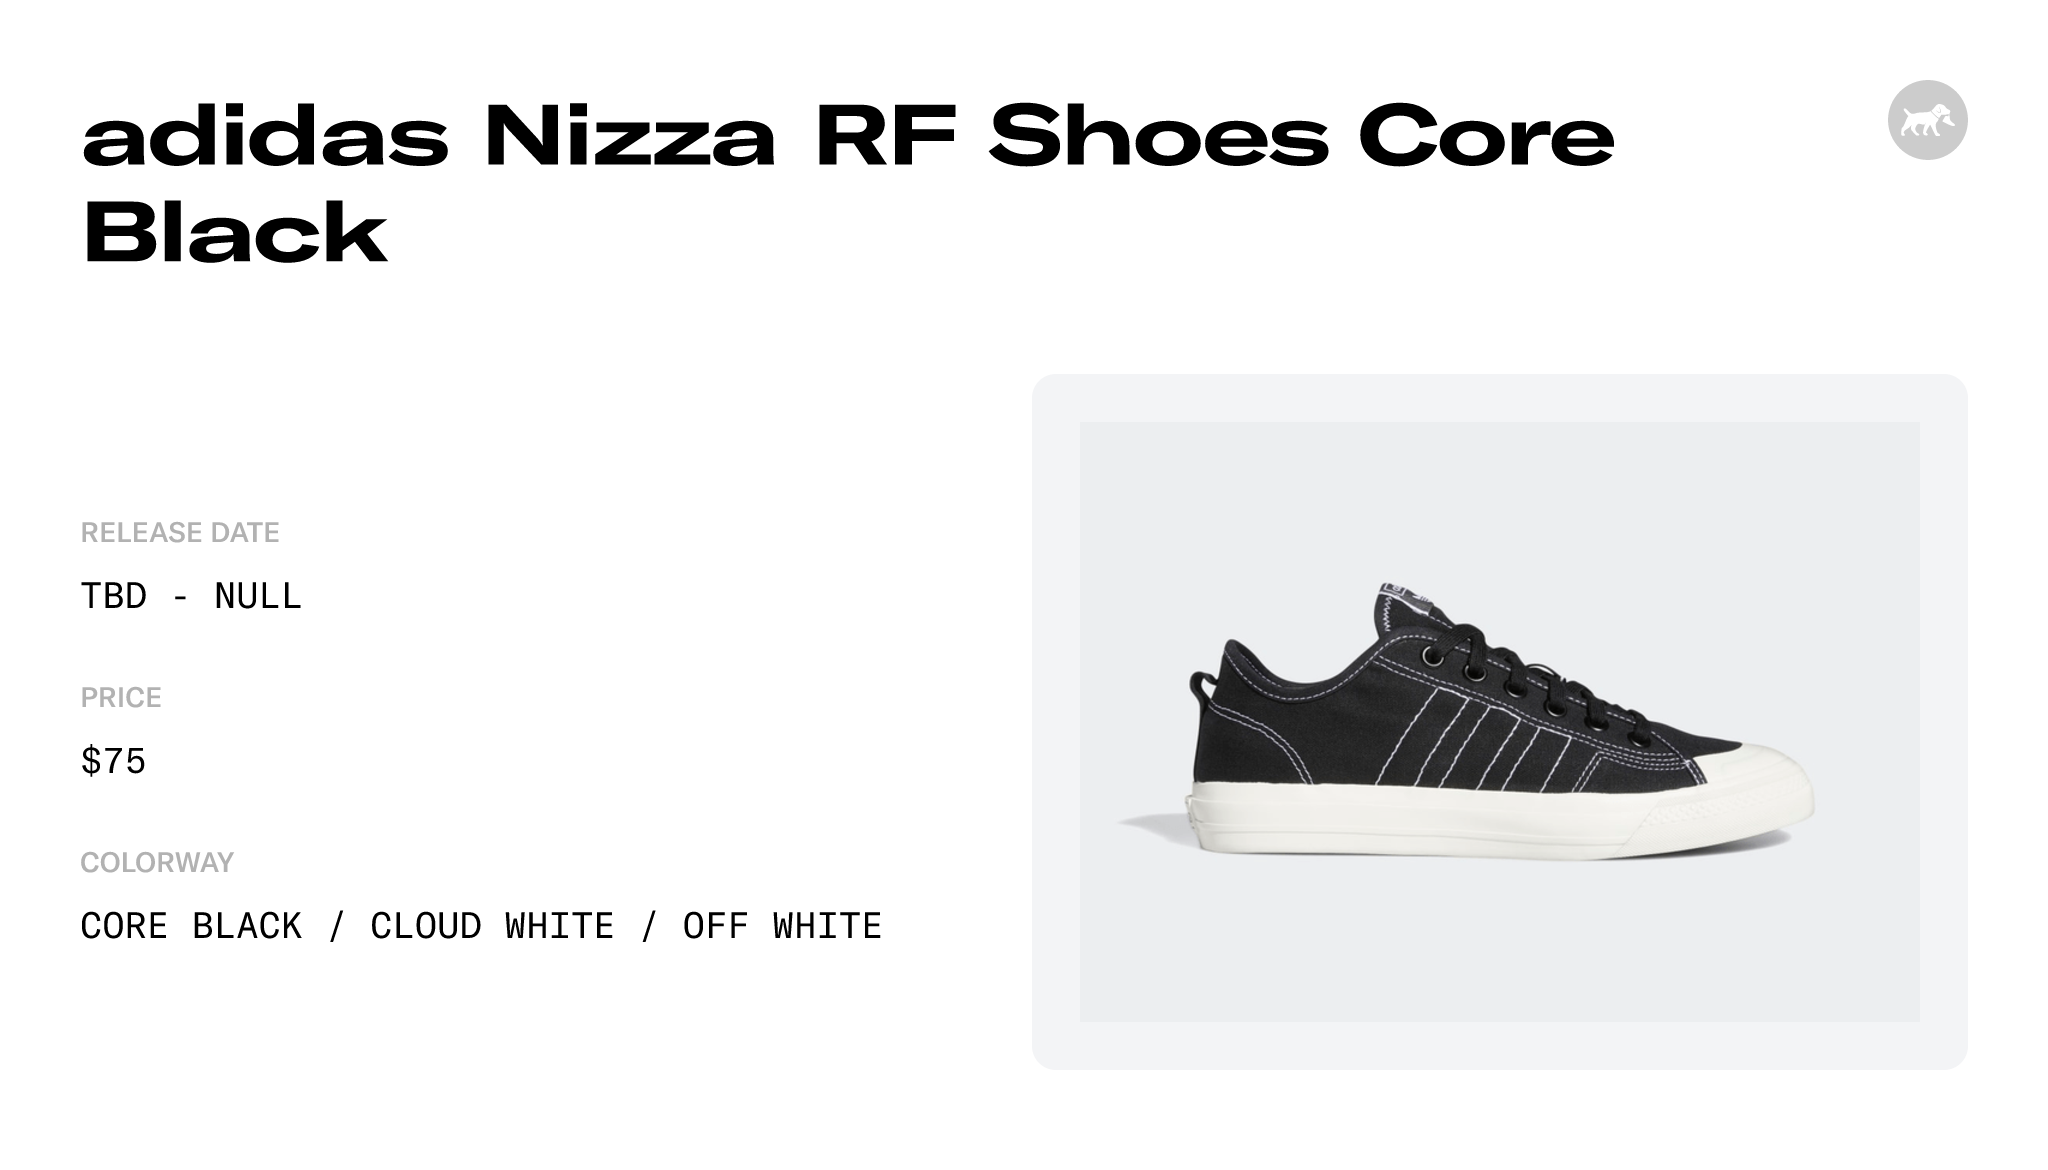 Nizza RF EE5599 and Black Release Core Raffles adidas Shoes - Date